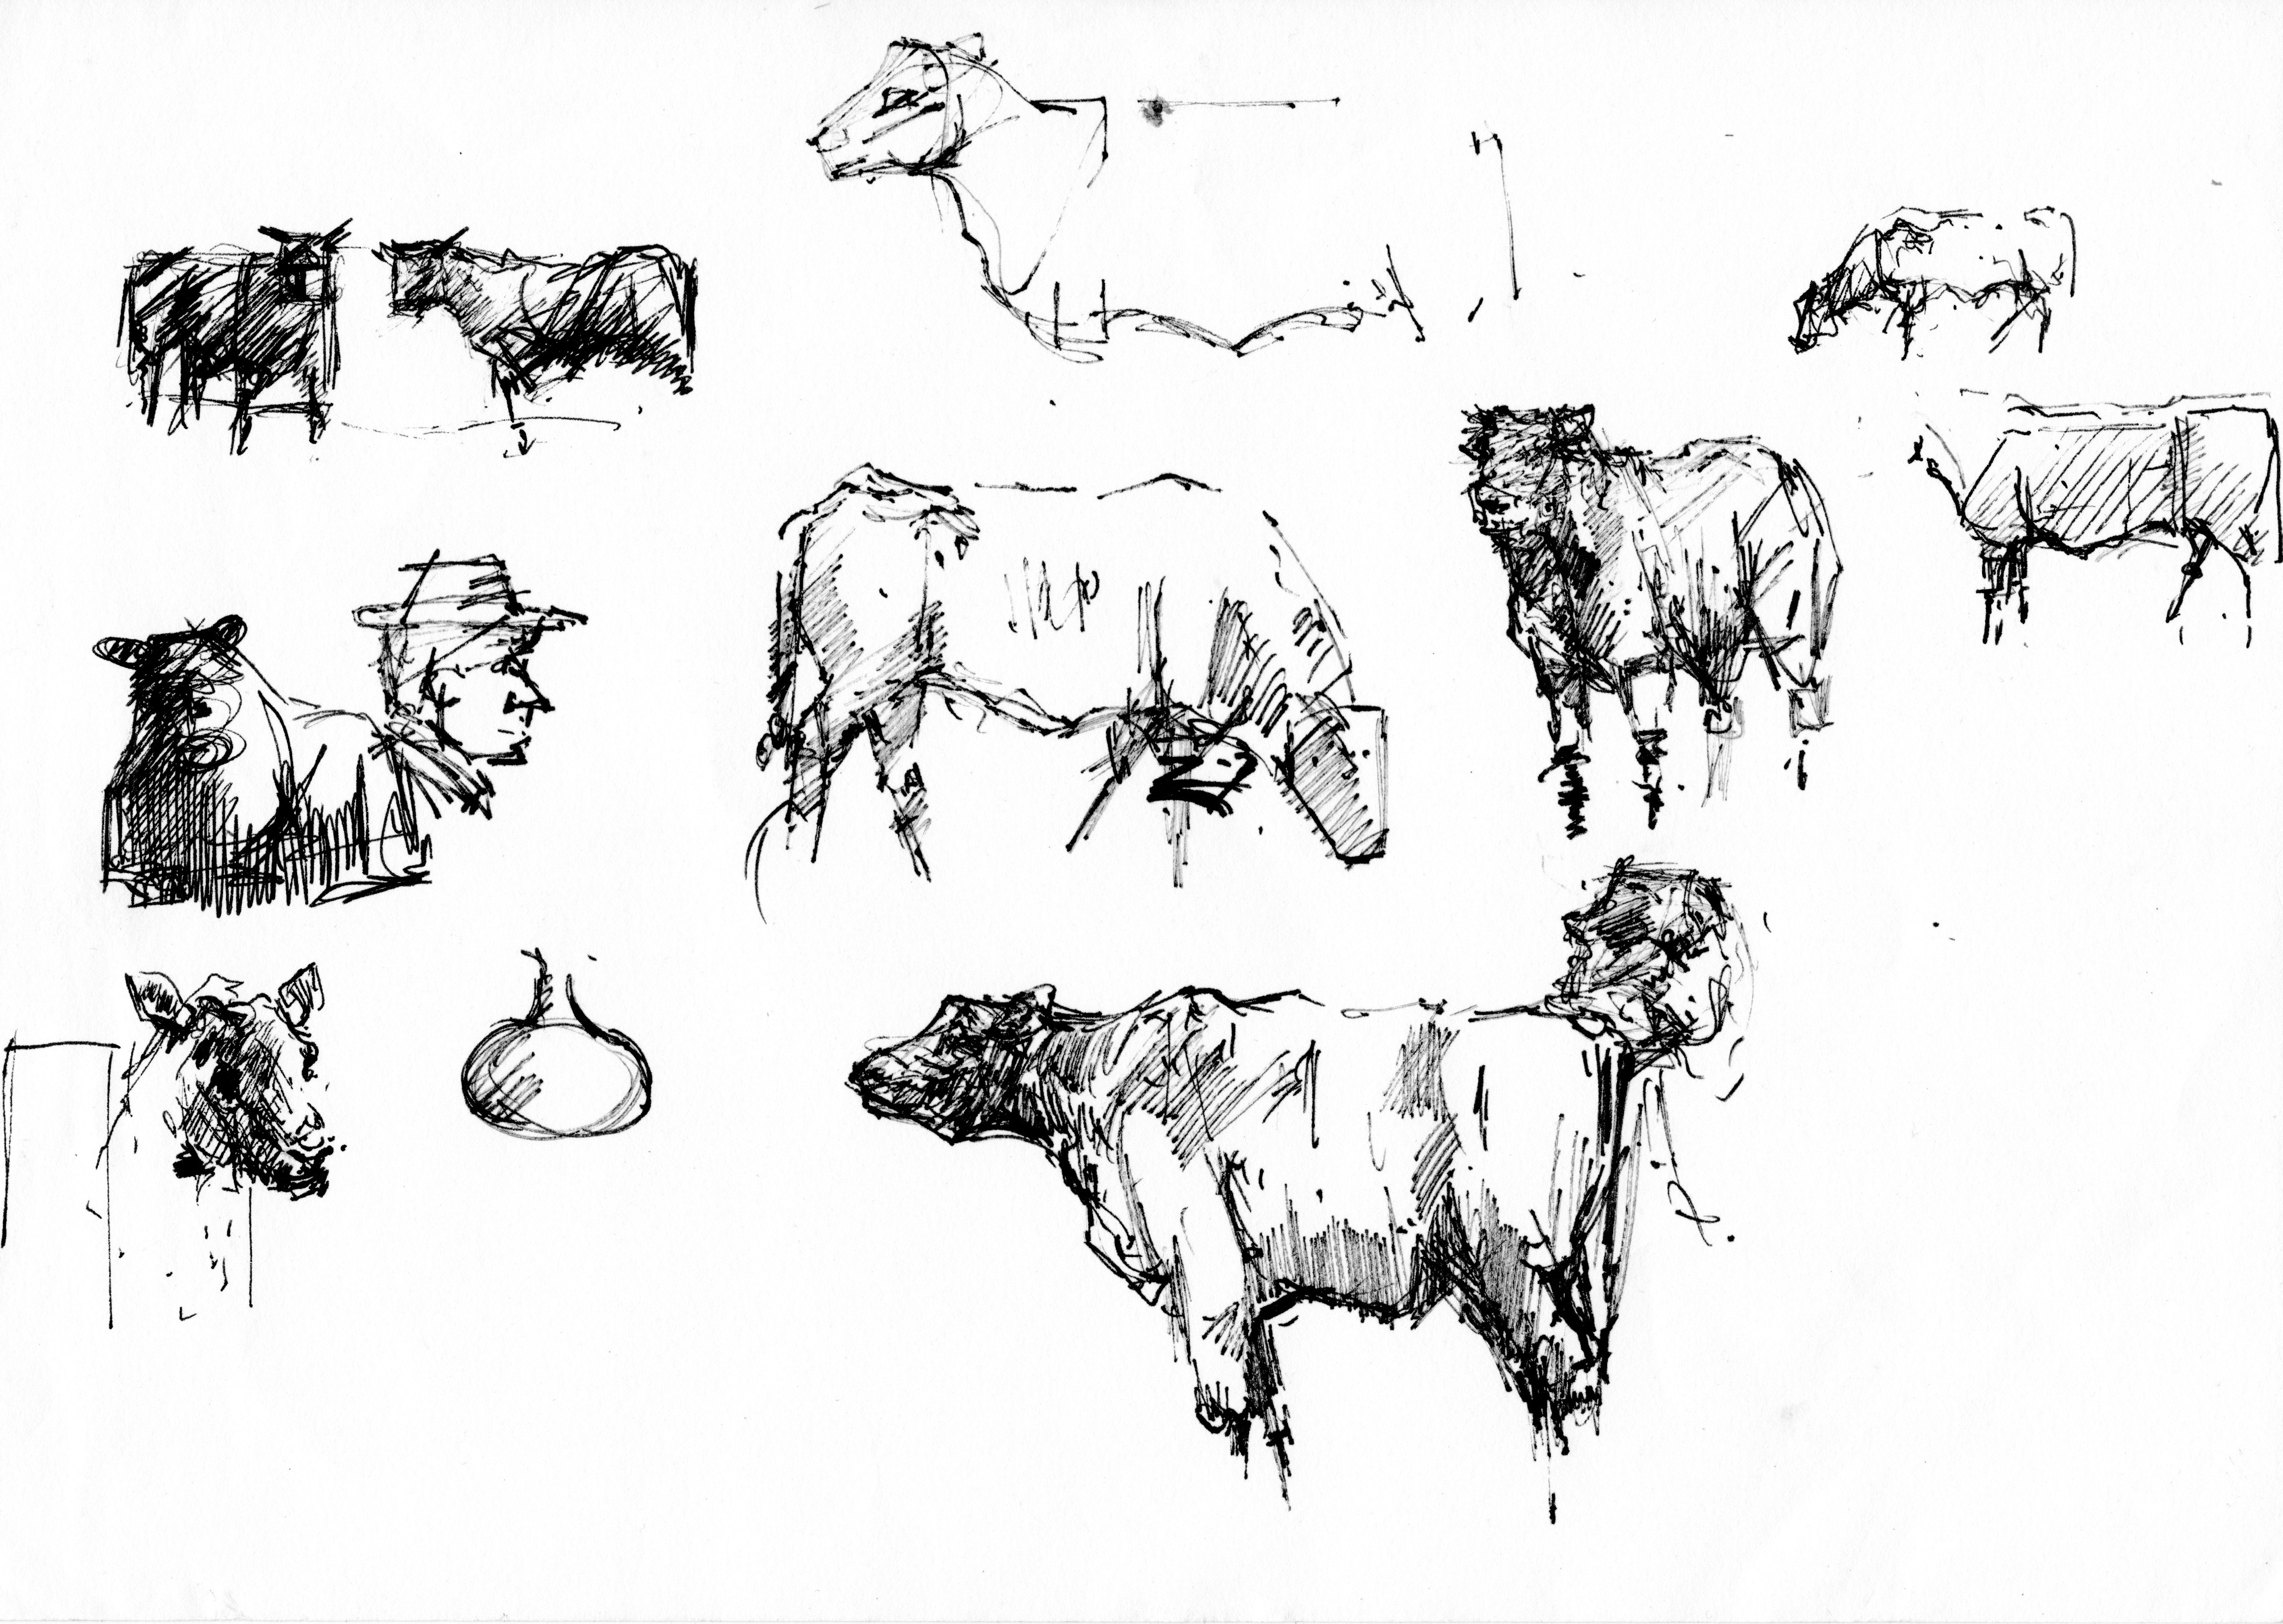 "Cattle Studies" by David 'Mouse' Cooper.